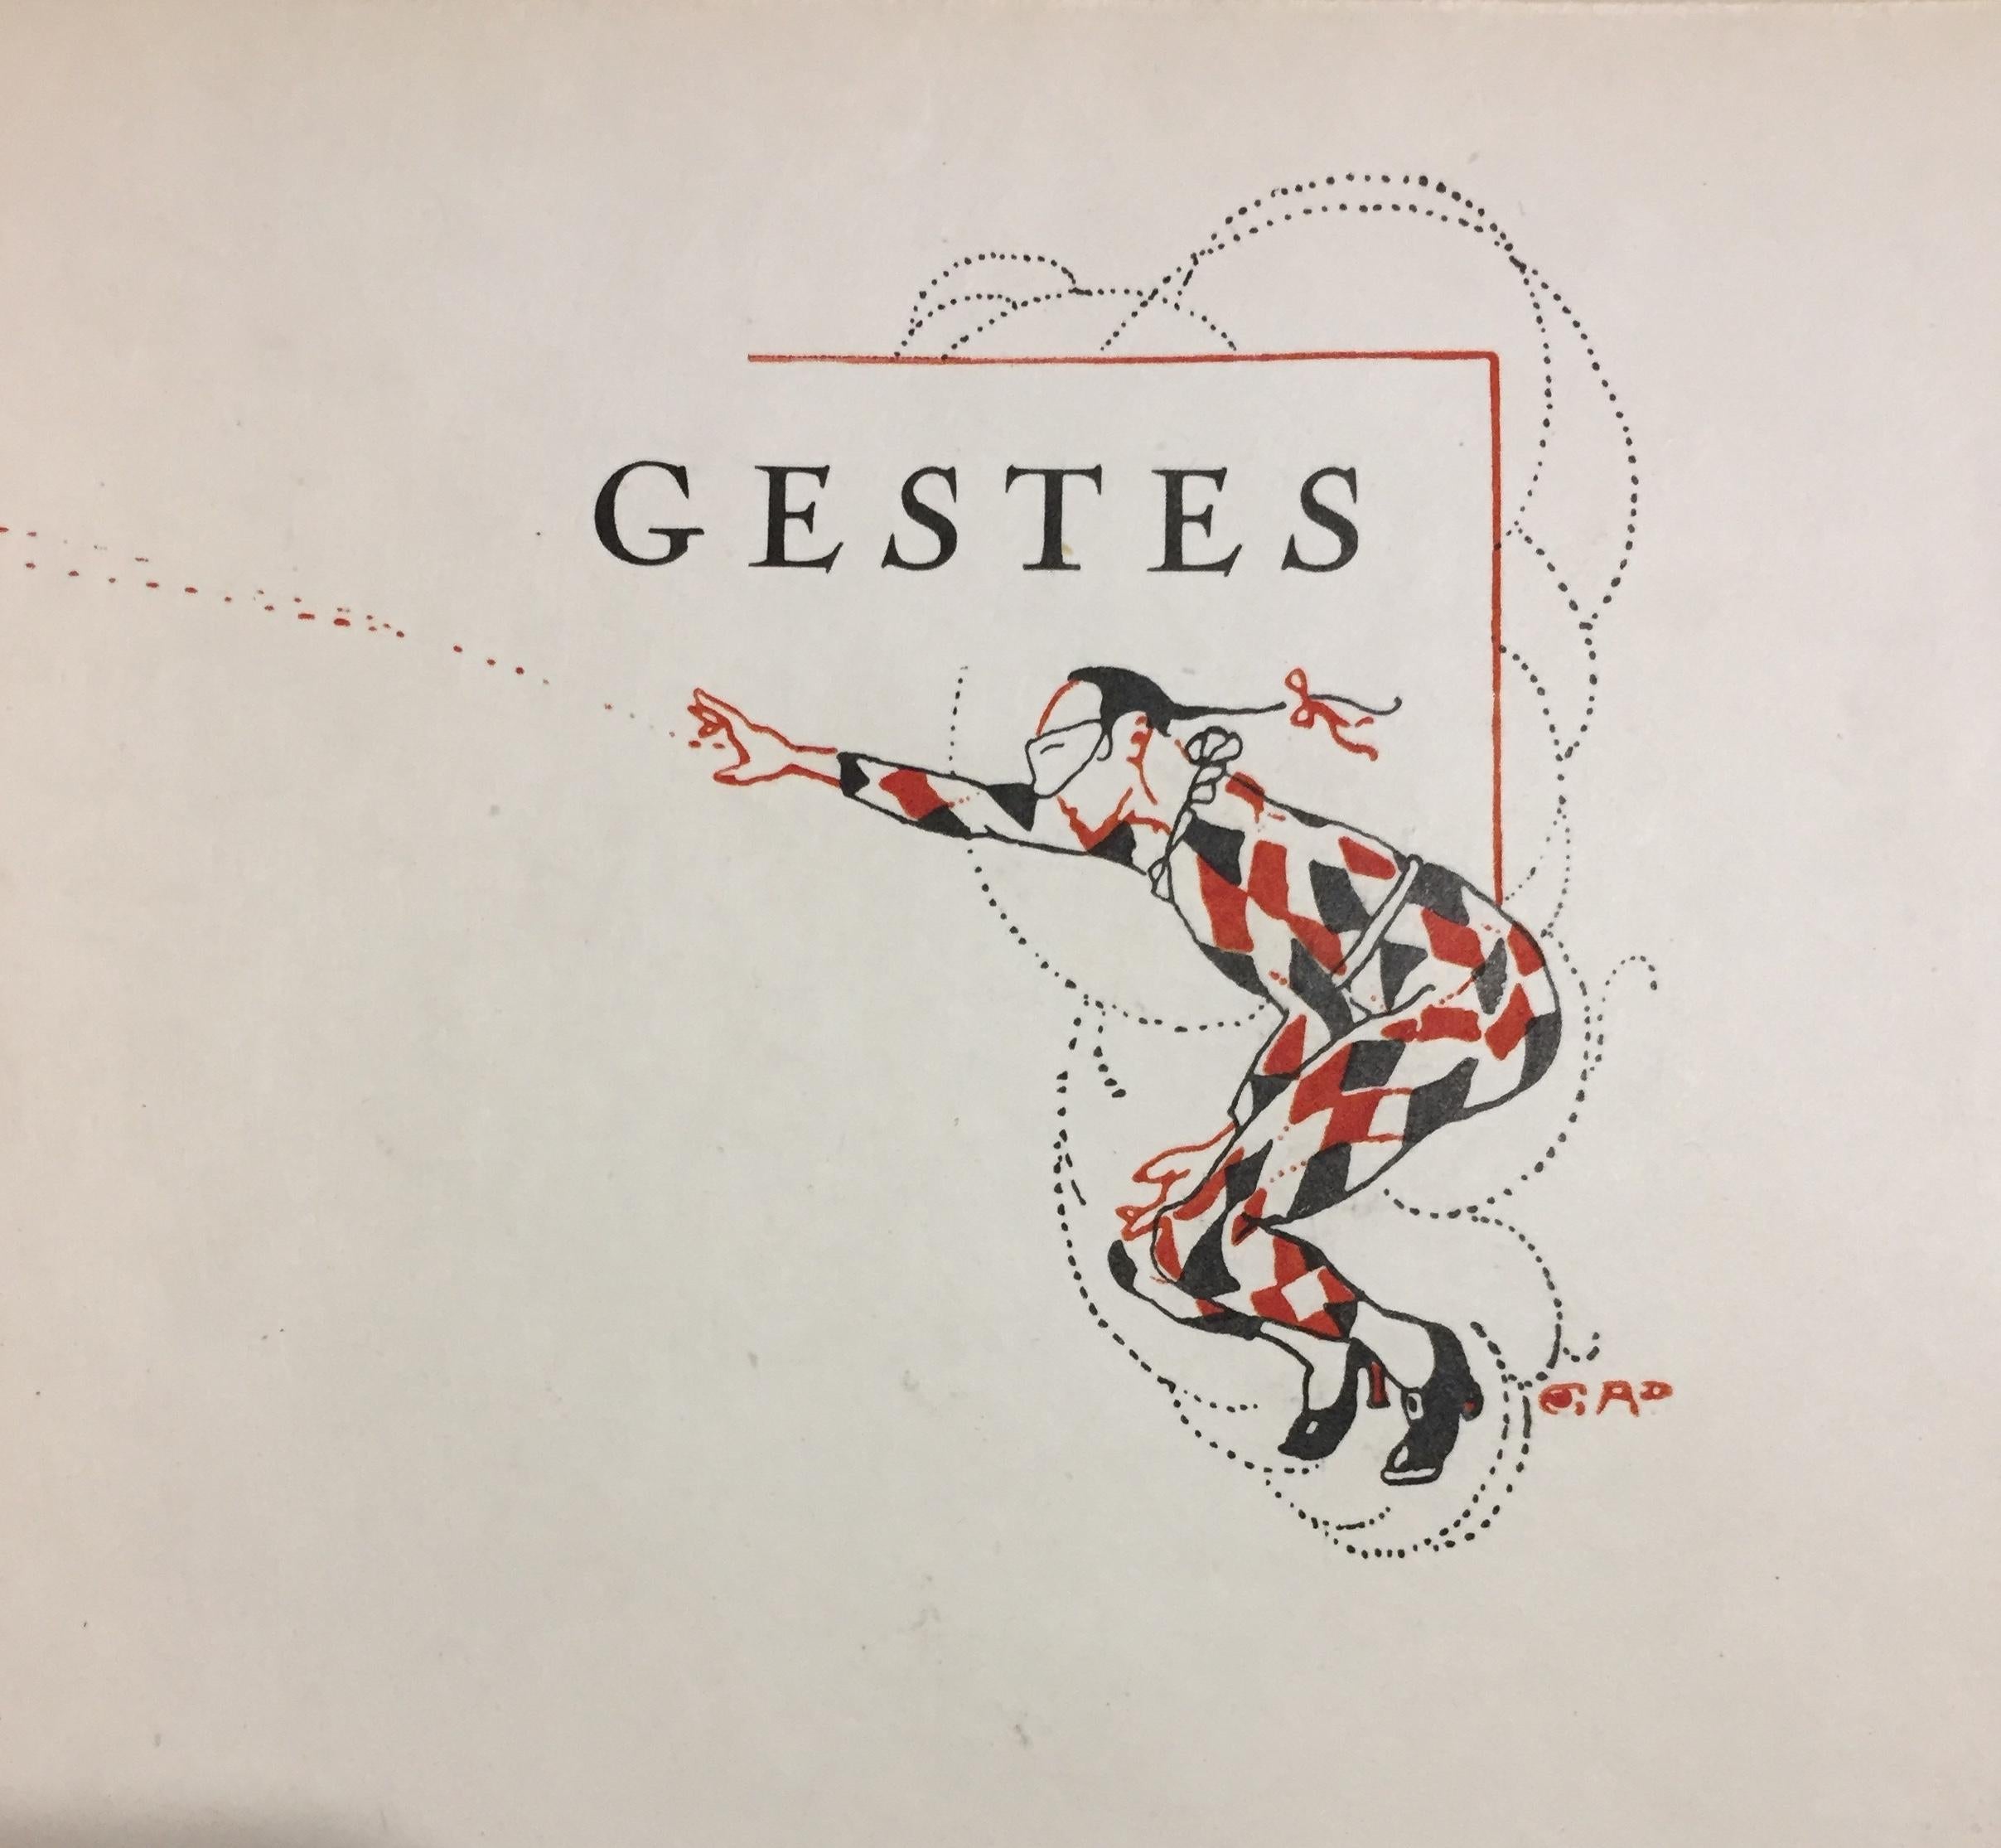 Gestes - Rare Book Illustrated by Alfred Jarry - 1920 For Sale 9